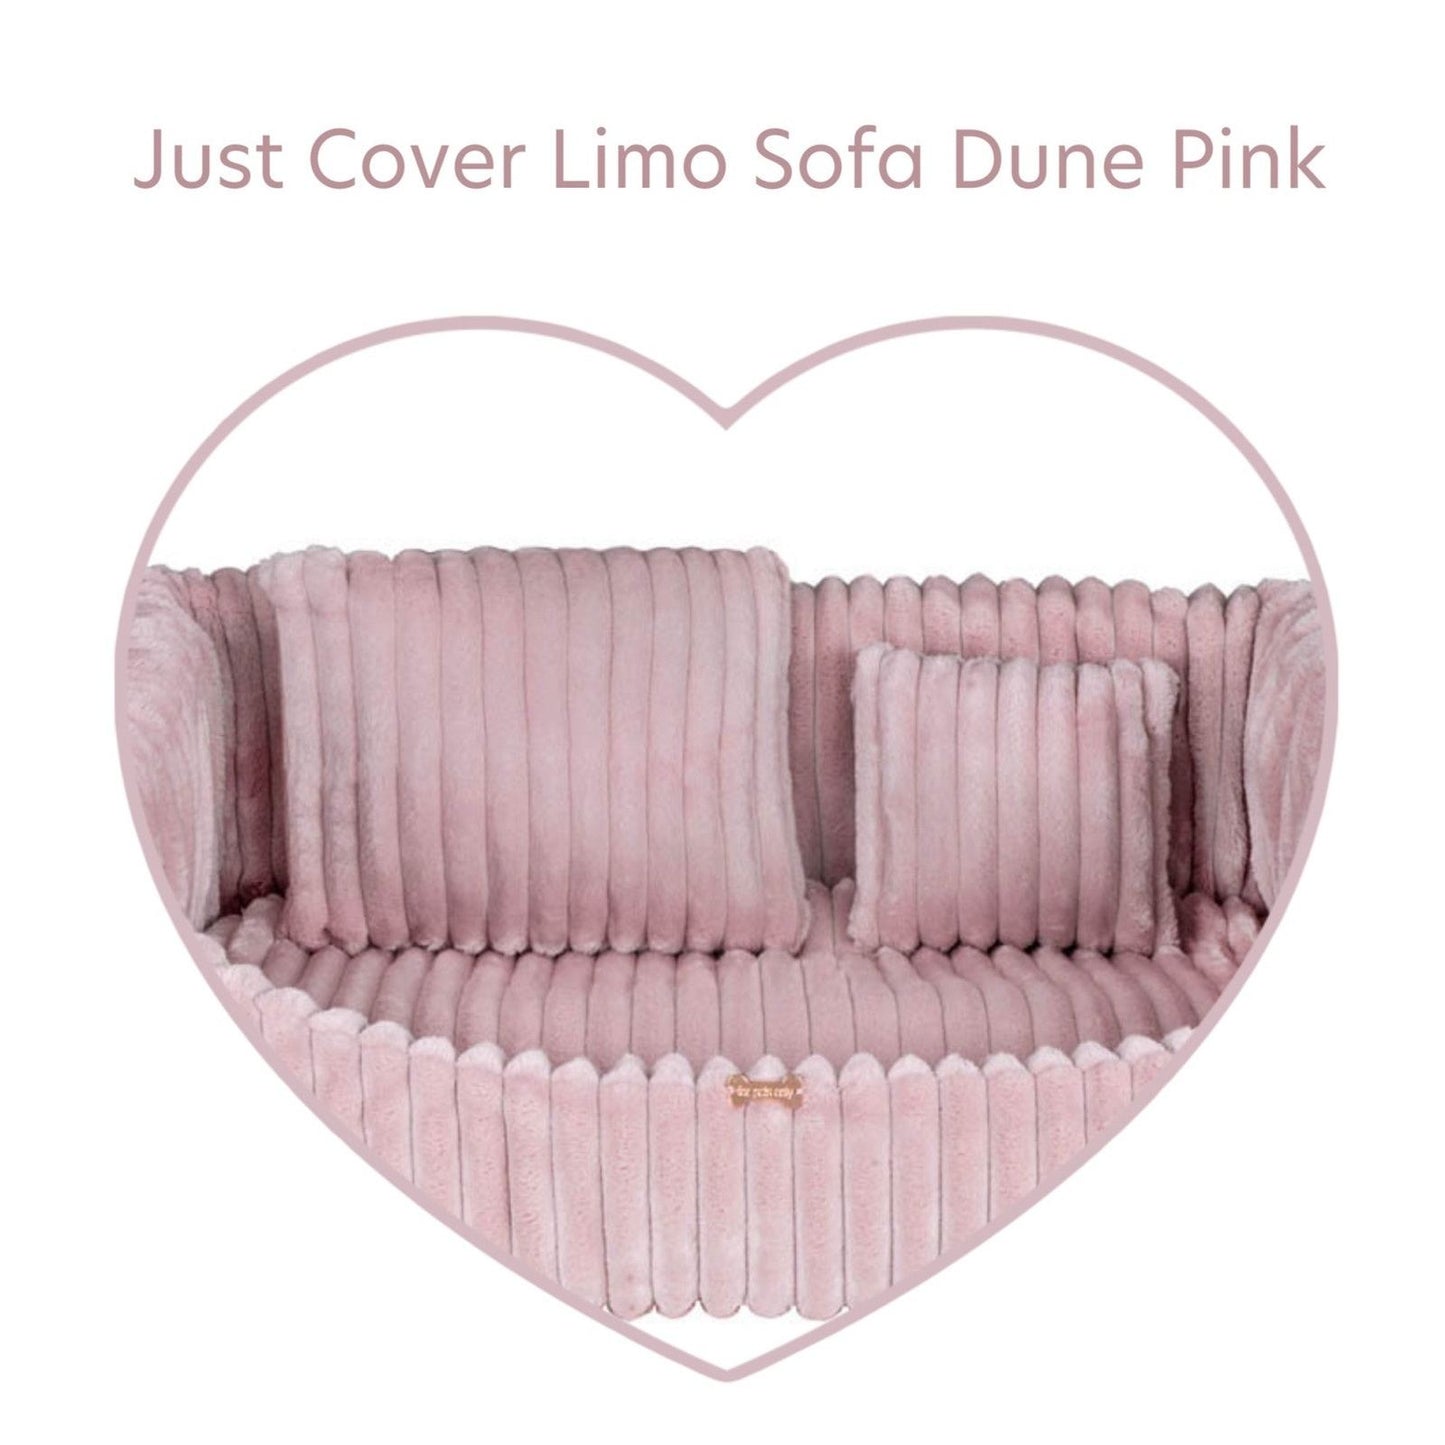 For Pets Only Baw Limo Sofa Dune Pink